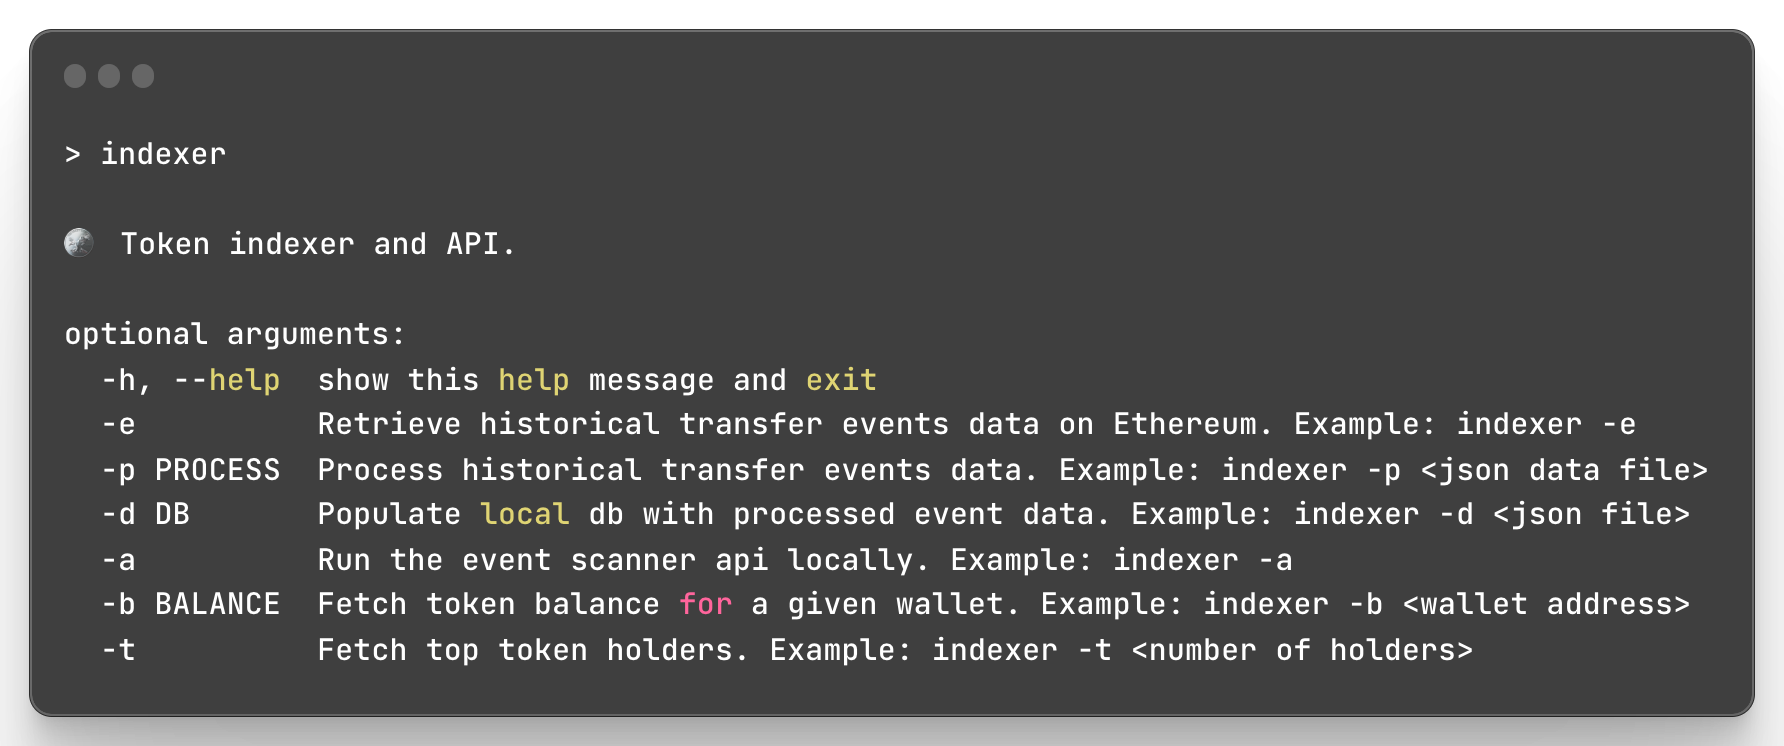 the scanner cli, which is installed under the package name "indexer".